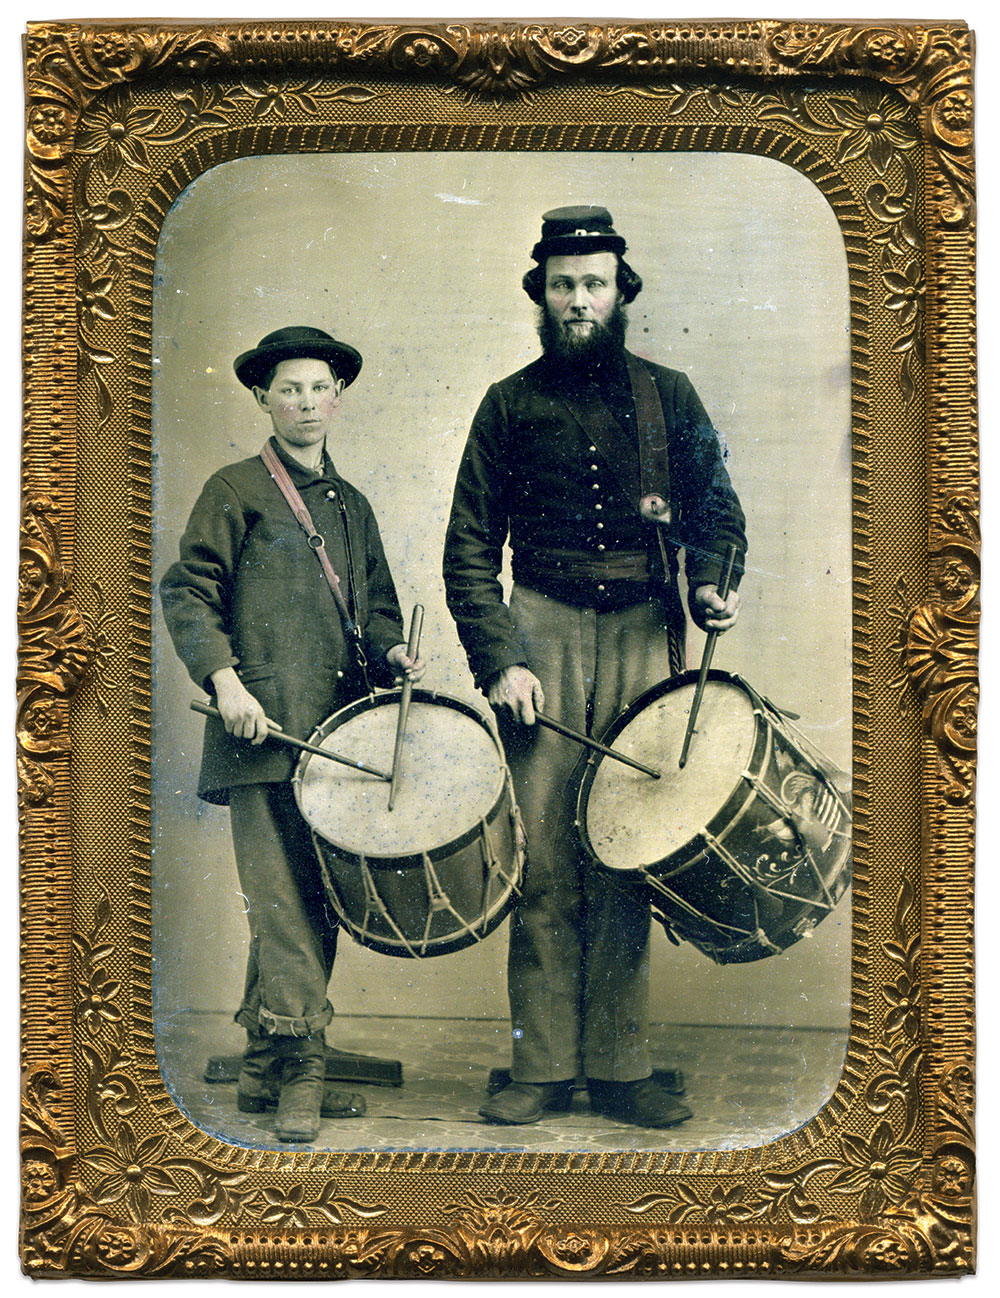 Quarter-plate tintype by an unidentified photographer. Brian Boeve Collection.